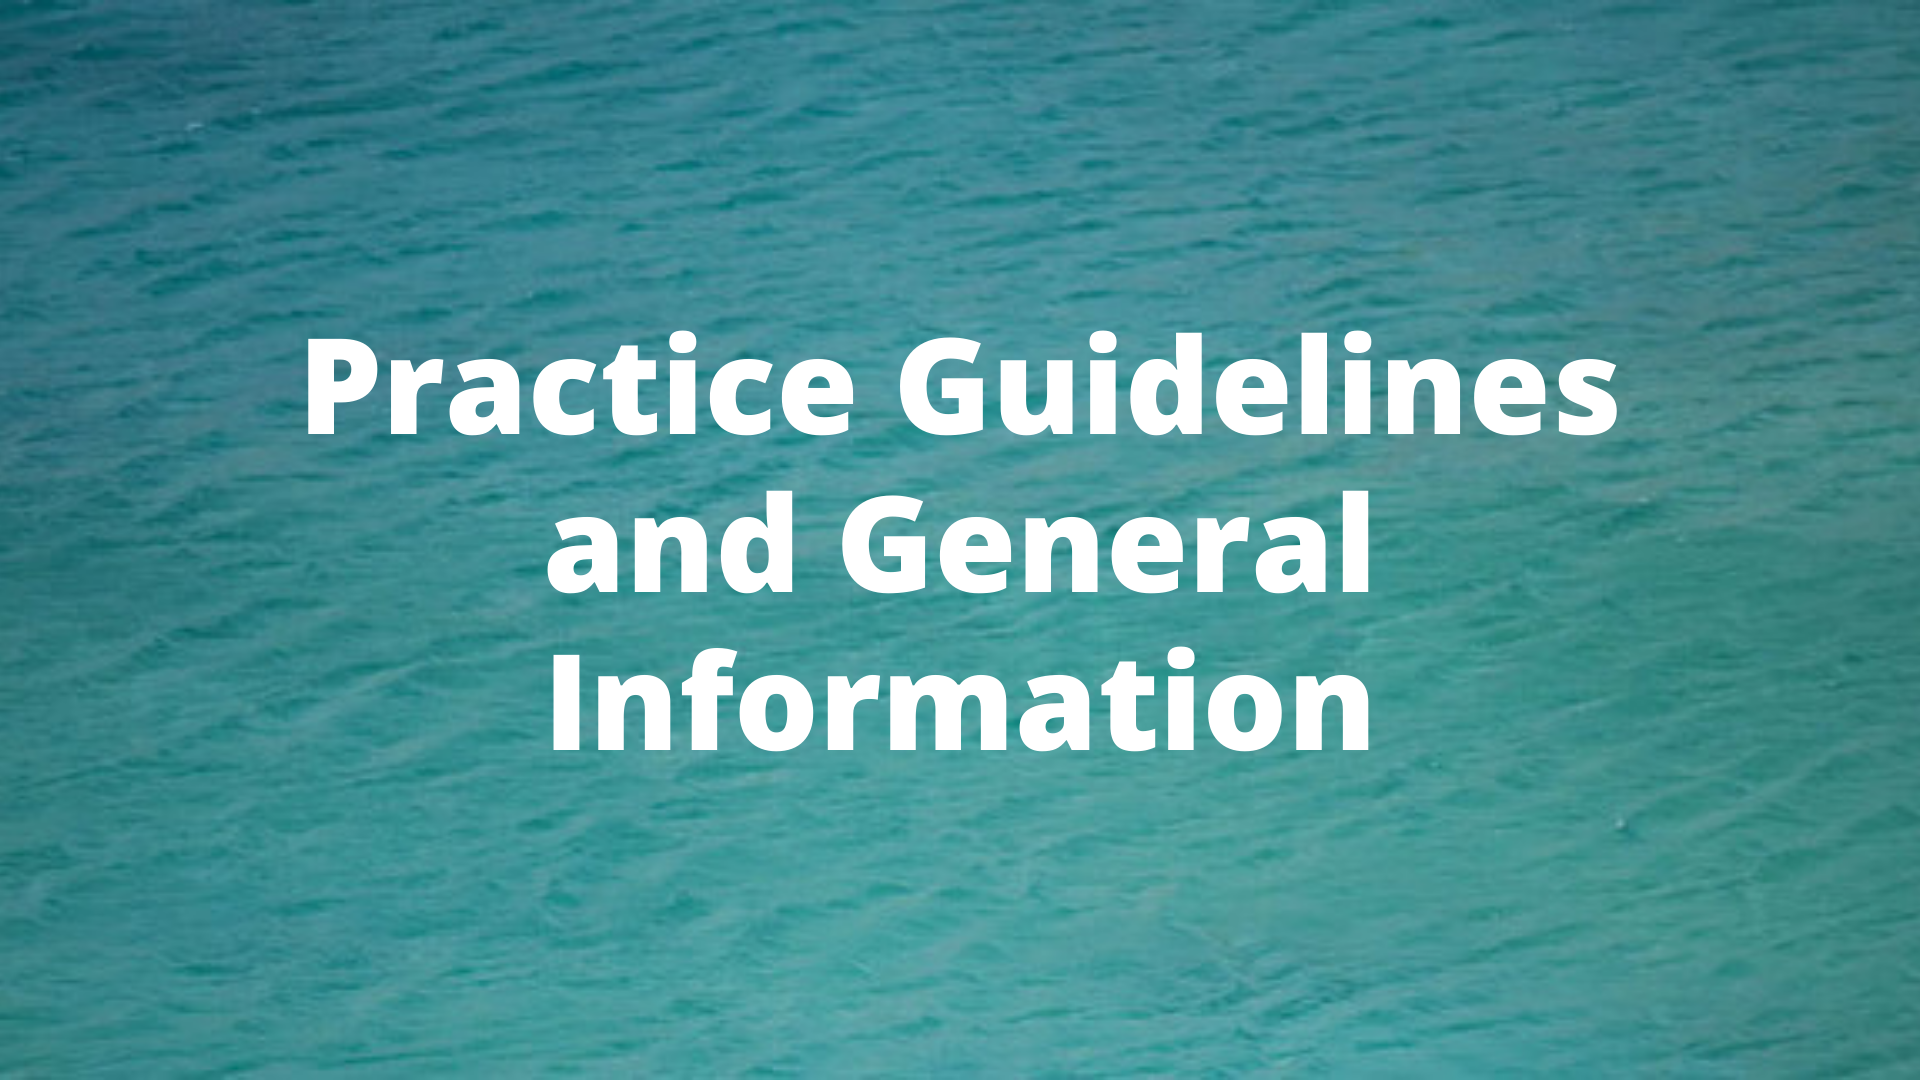 Practice Guidelines and General Information